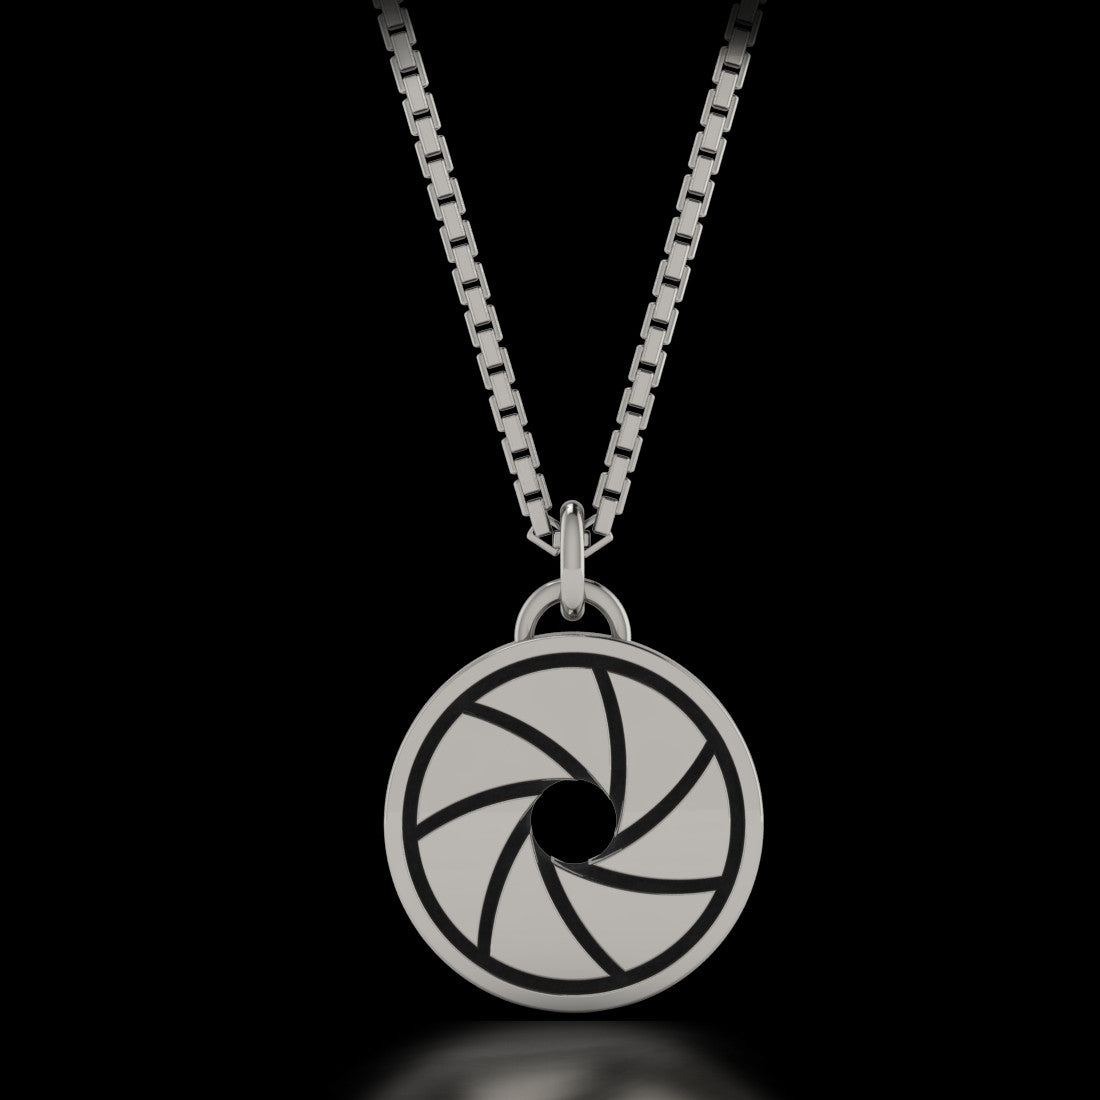 Photographer Camera Diaphragm Necklace  - Sterling Silver - Twisted Love NYC